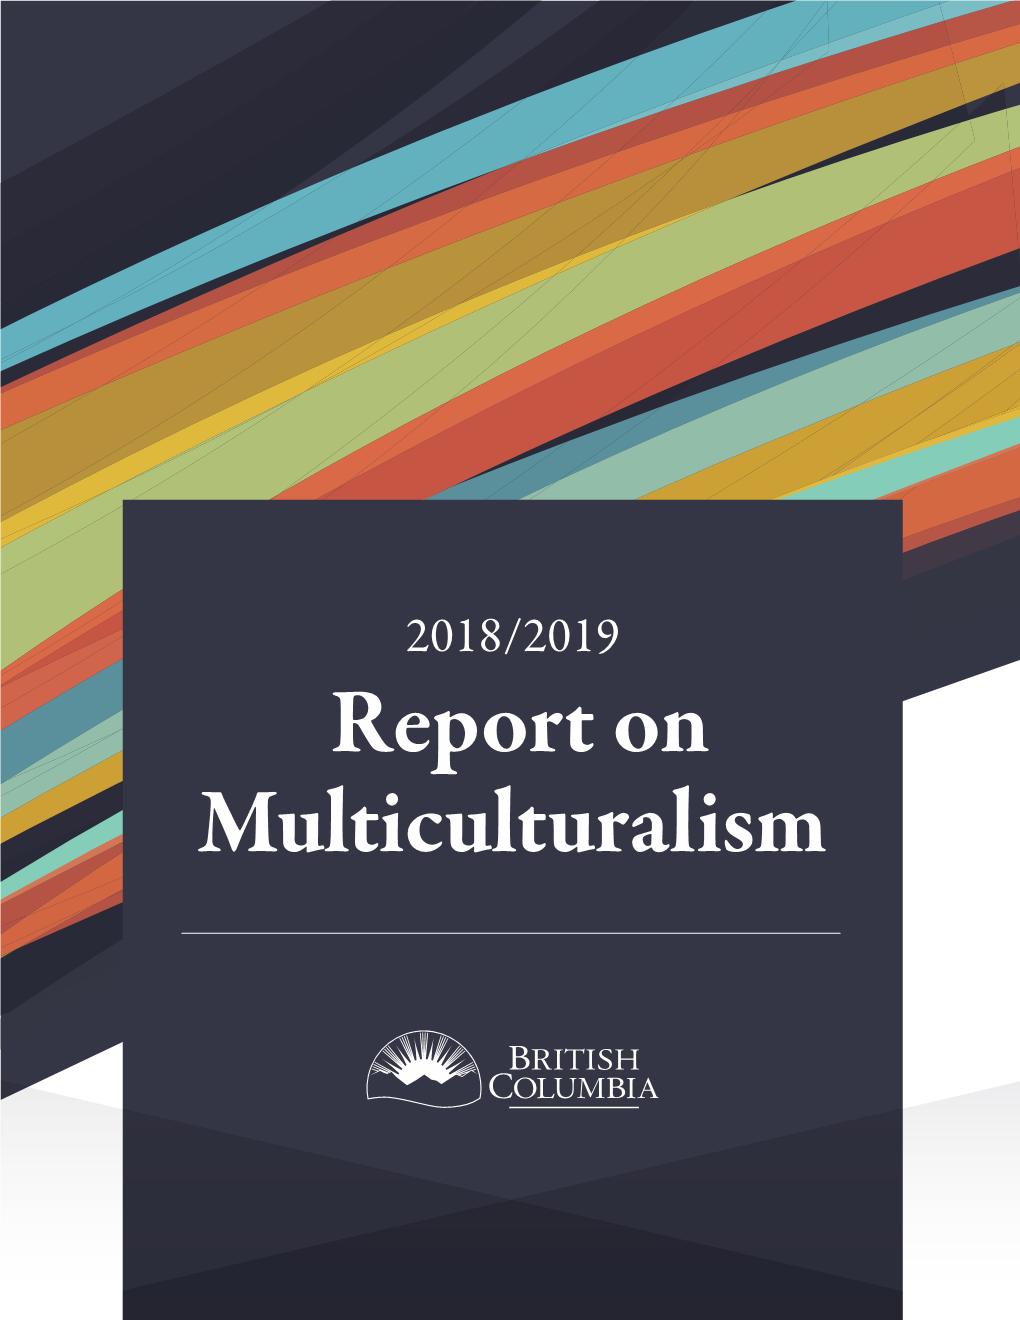 Report on Multiculturalism 2018/2019